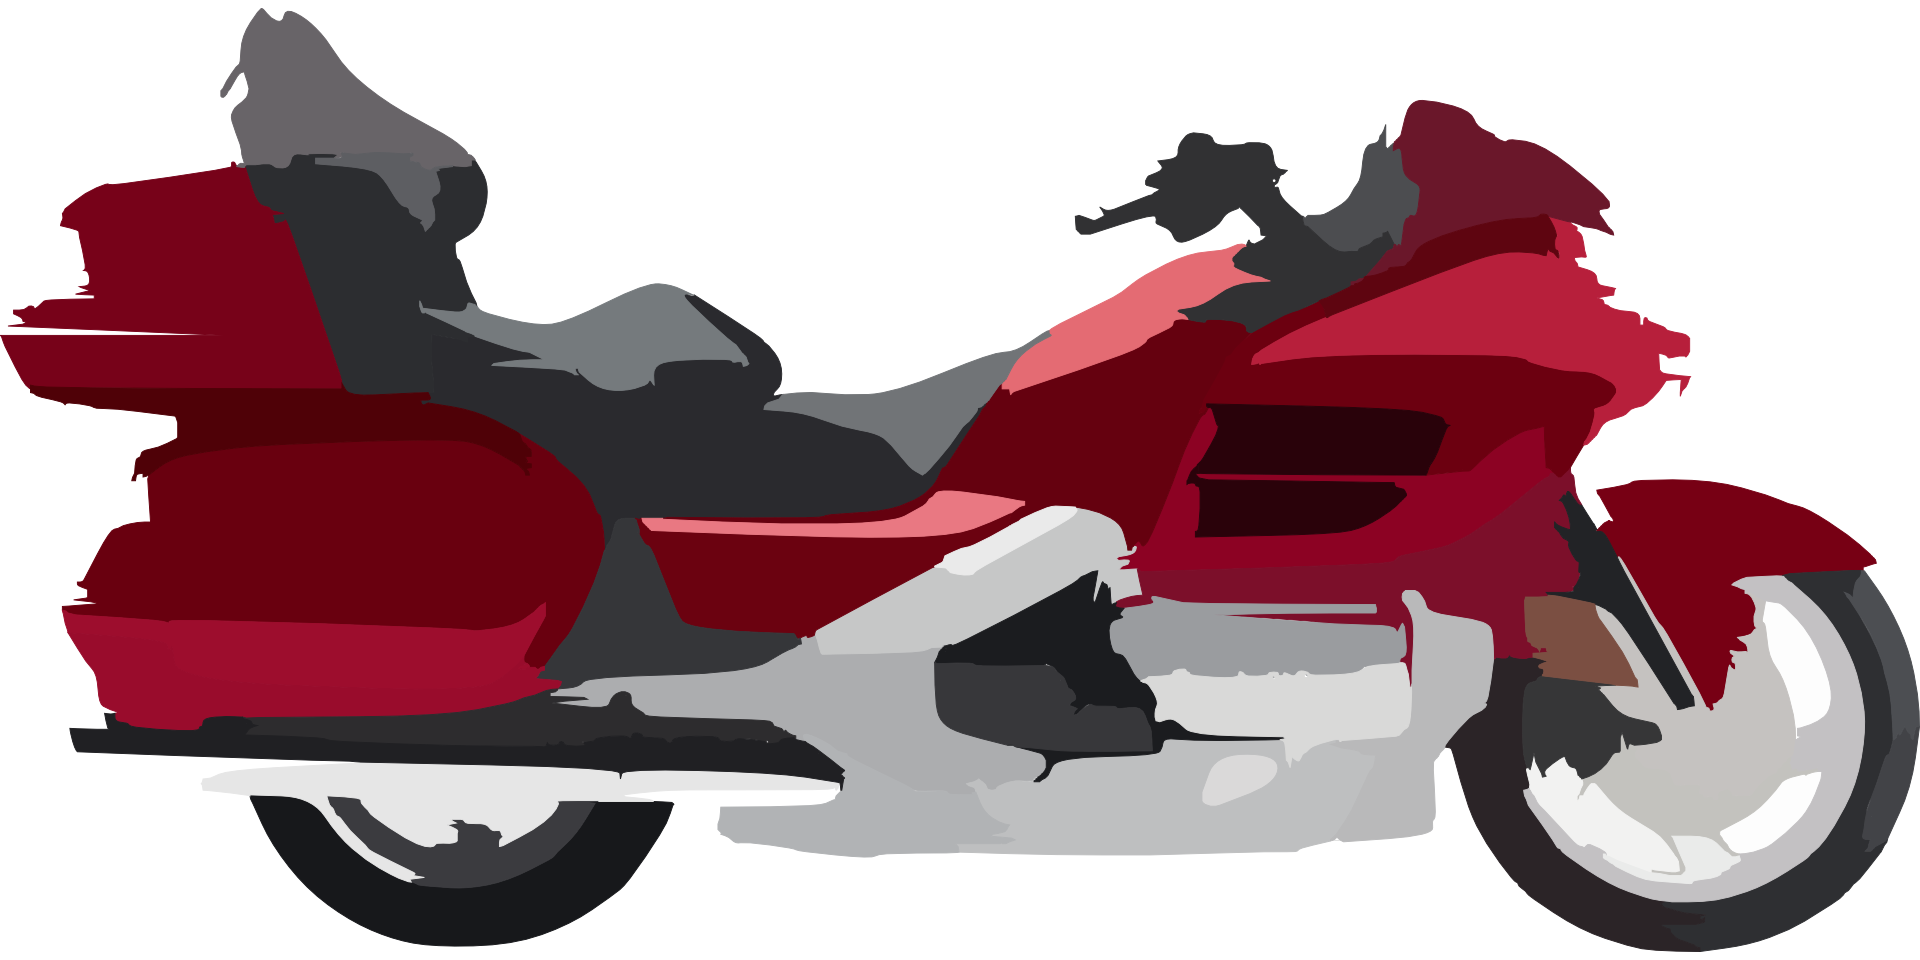 Drawing of a red motorcycle free image download